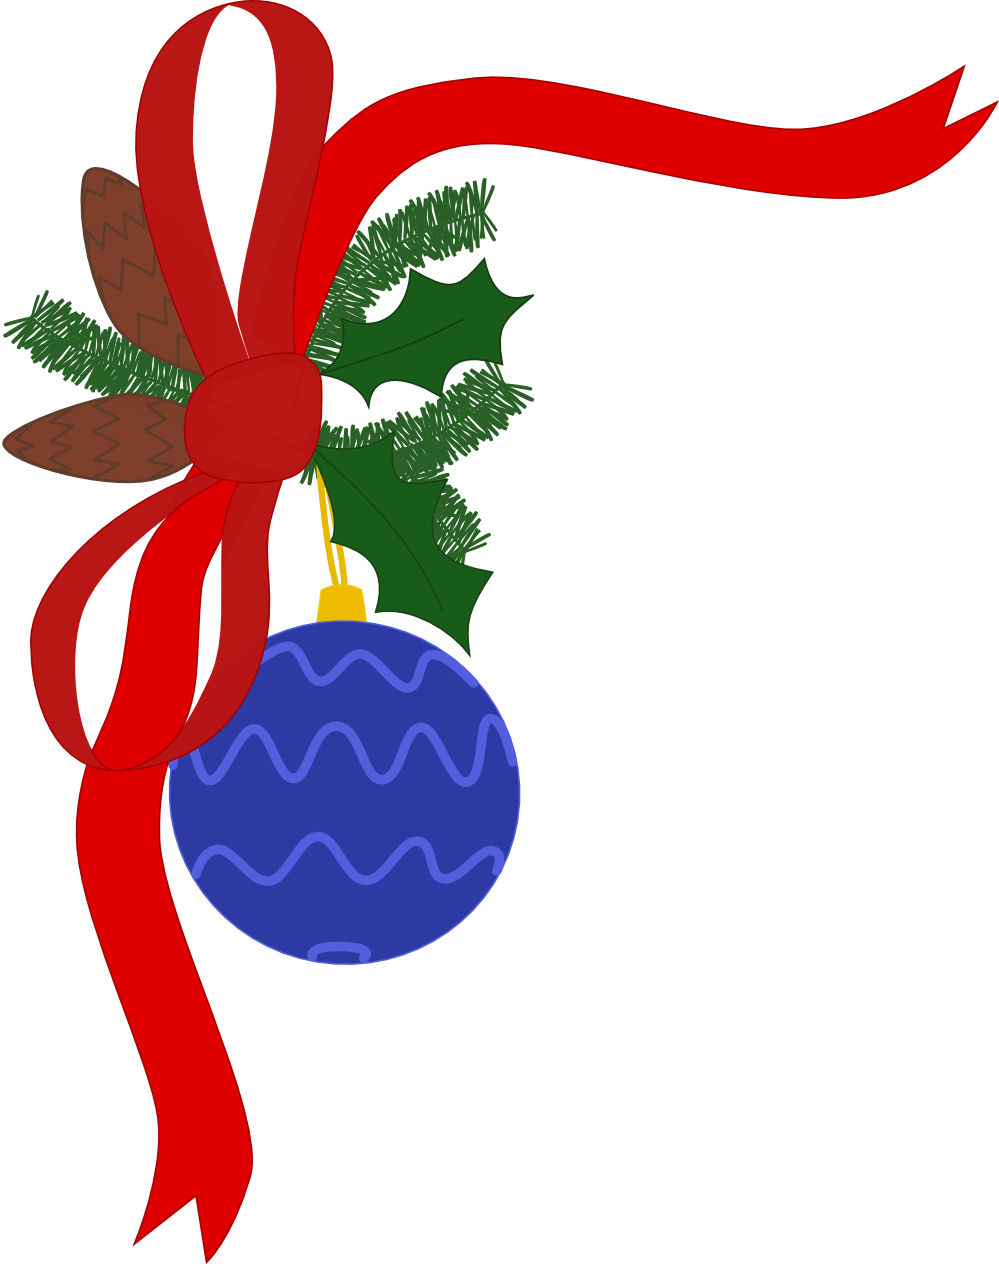 Holidays Clip Art - Clipart library